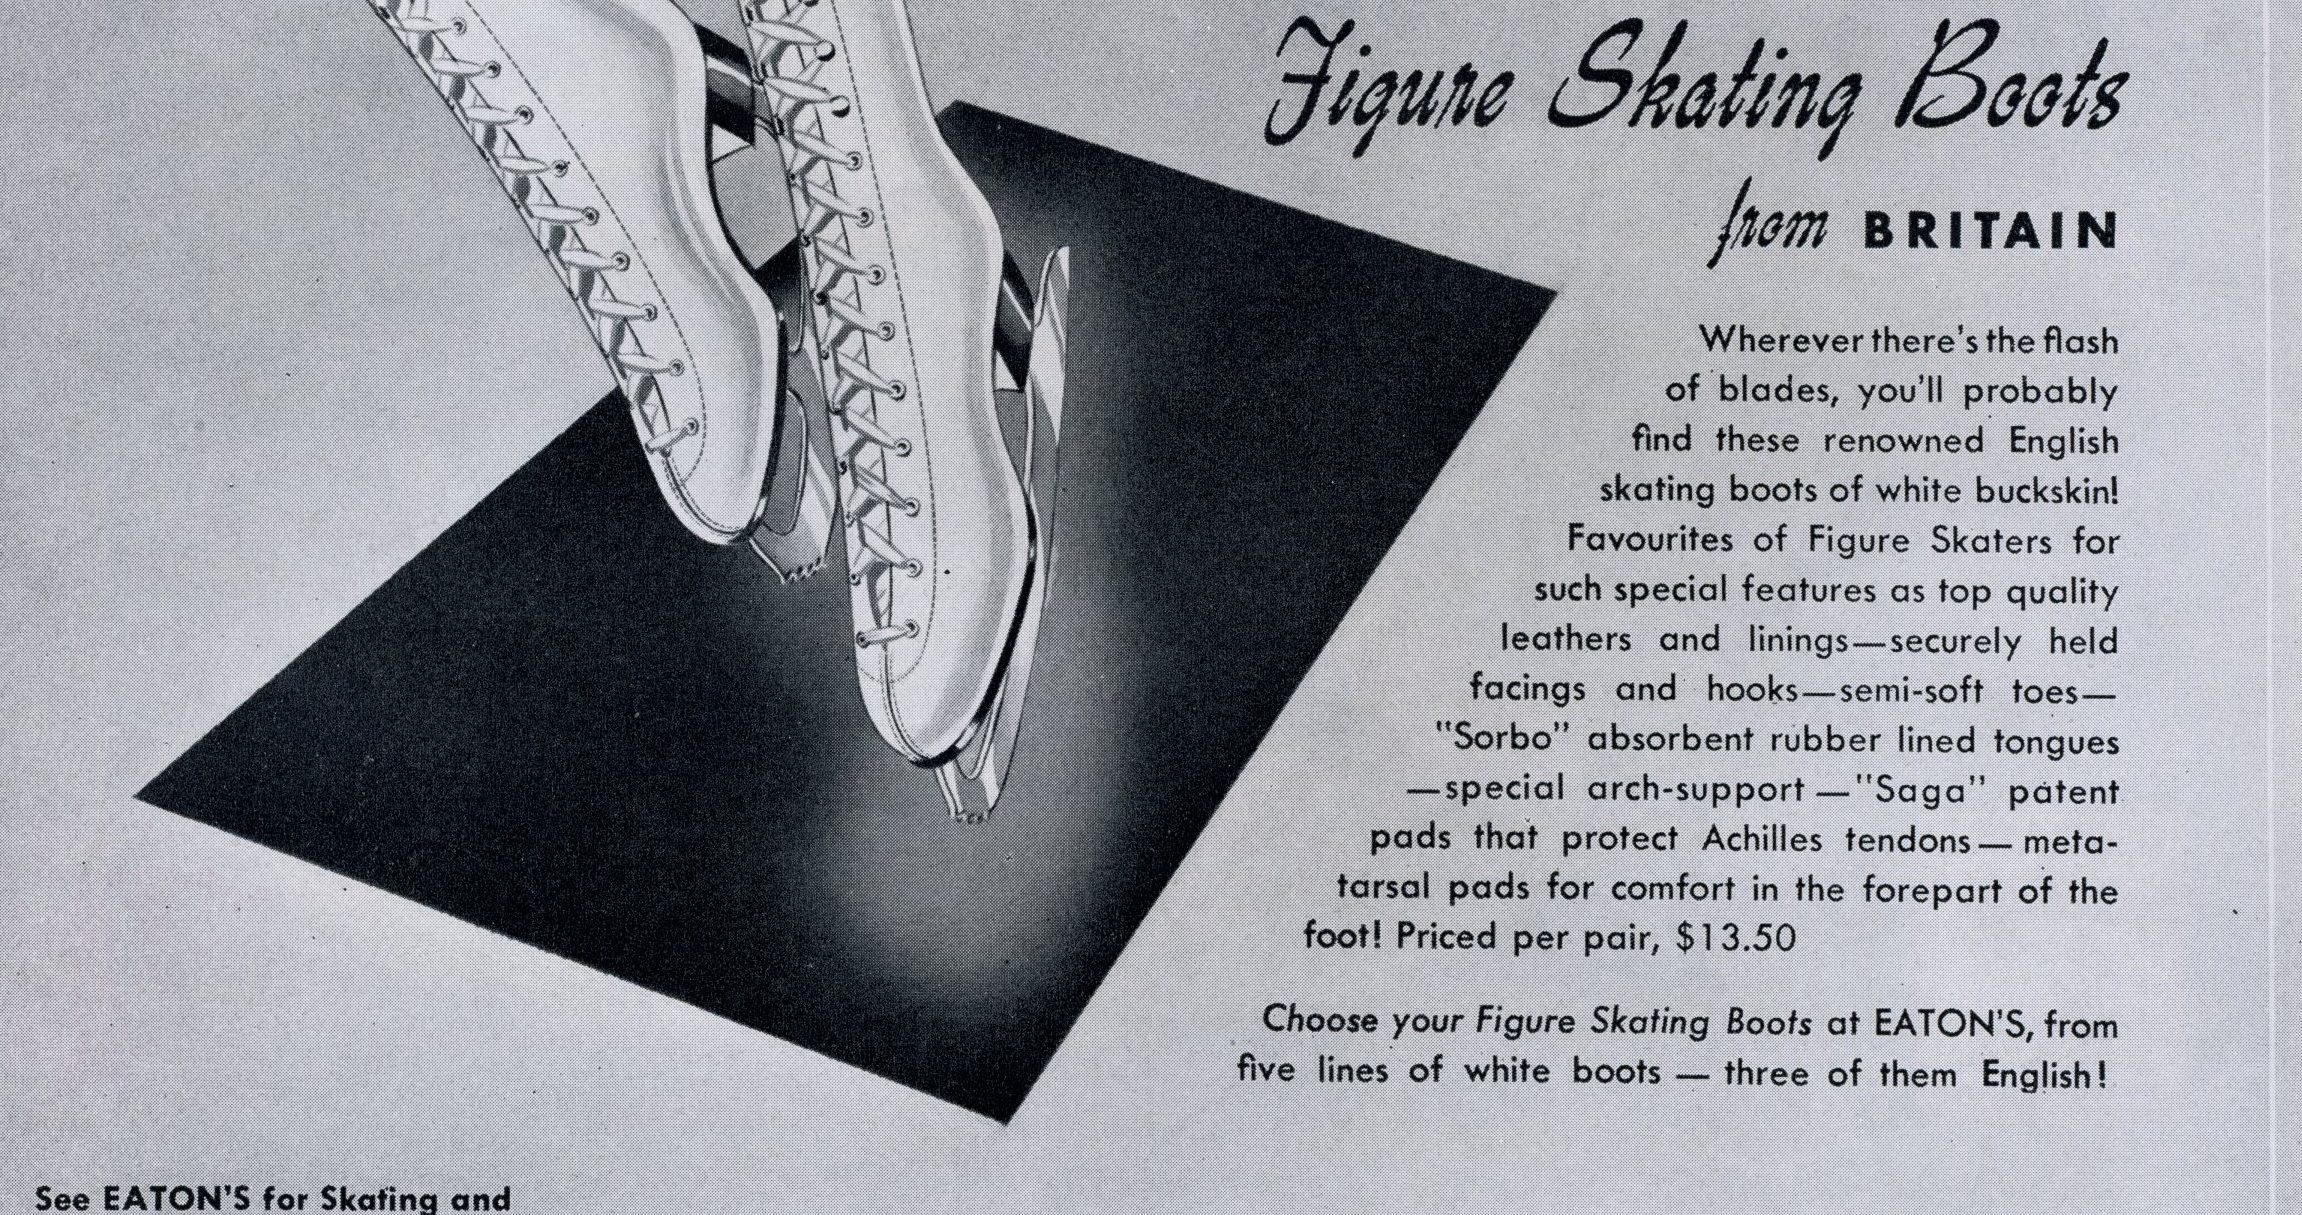 A black and white ad featuring an illustration of white, lace-up figure skates. The text includes: “Where ever there’s the flash of blades, you’ll probably find these renowned English skating boots of white buckskin! Favourites of Figure Skaters for such special features as top quality leathers and linings – securely held facings and hooks – semi-soft toes – “Sorbo” absorbent rubber lined tongues – special arch support – “Saga” patent pads that protect Achilles tendons – metatarsal pads for comfort in the forepart of the foot! Priced per pair, $13.50. Choose your figure skating boots at Eaton’s, rom five lines of white boots – three of them English!”